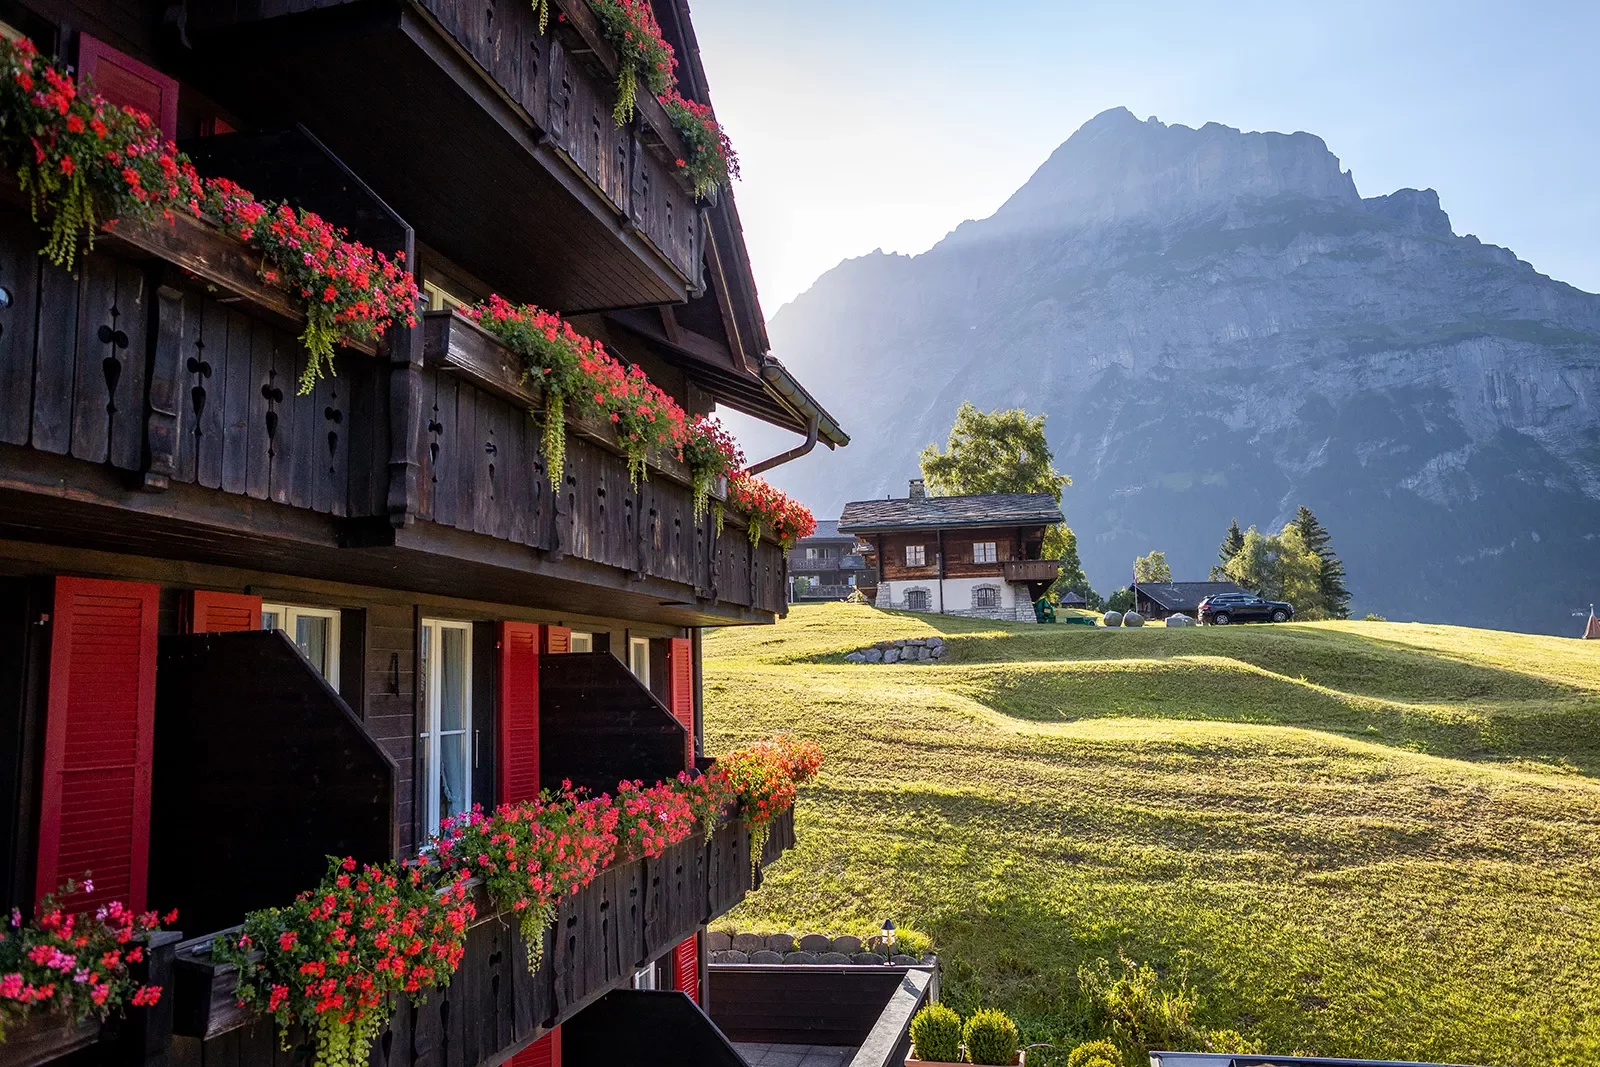 Shot of hotel balconies, large mountain, grassy hillside, red flowers.